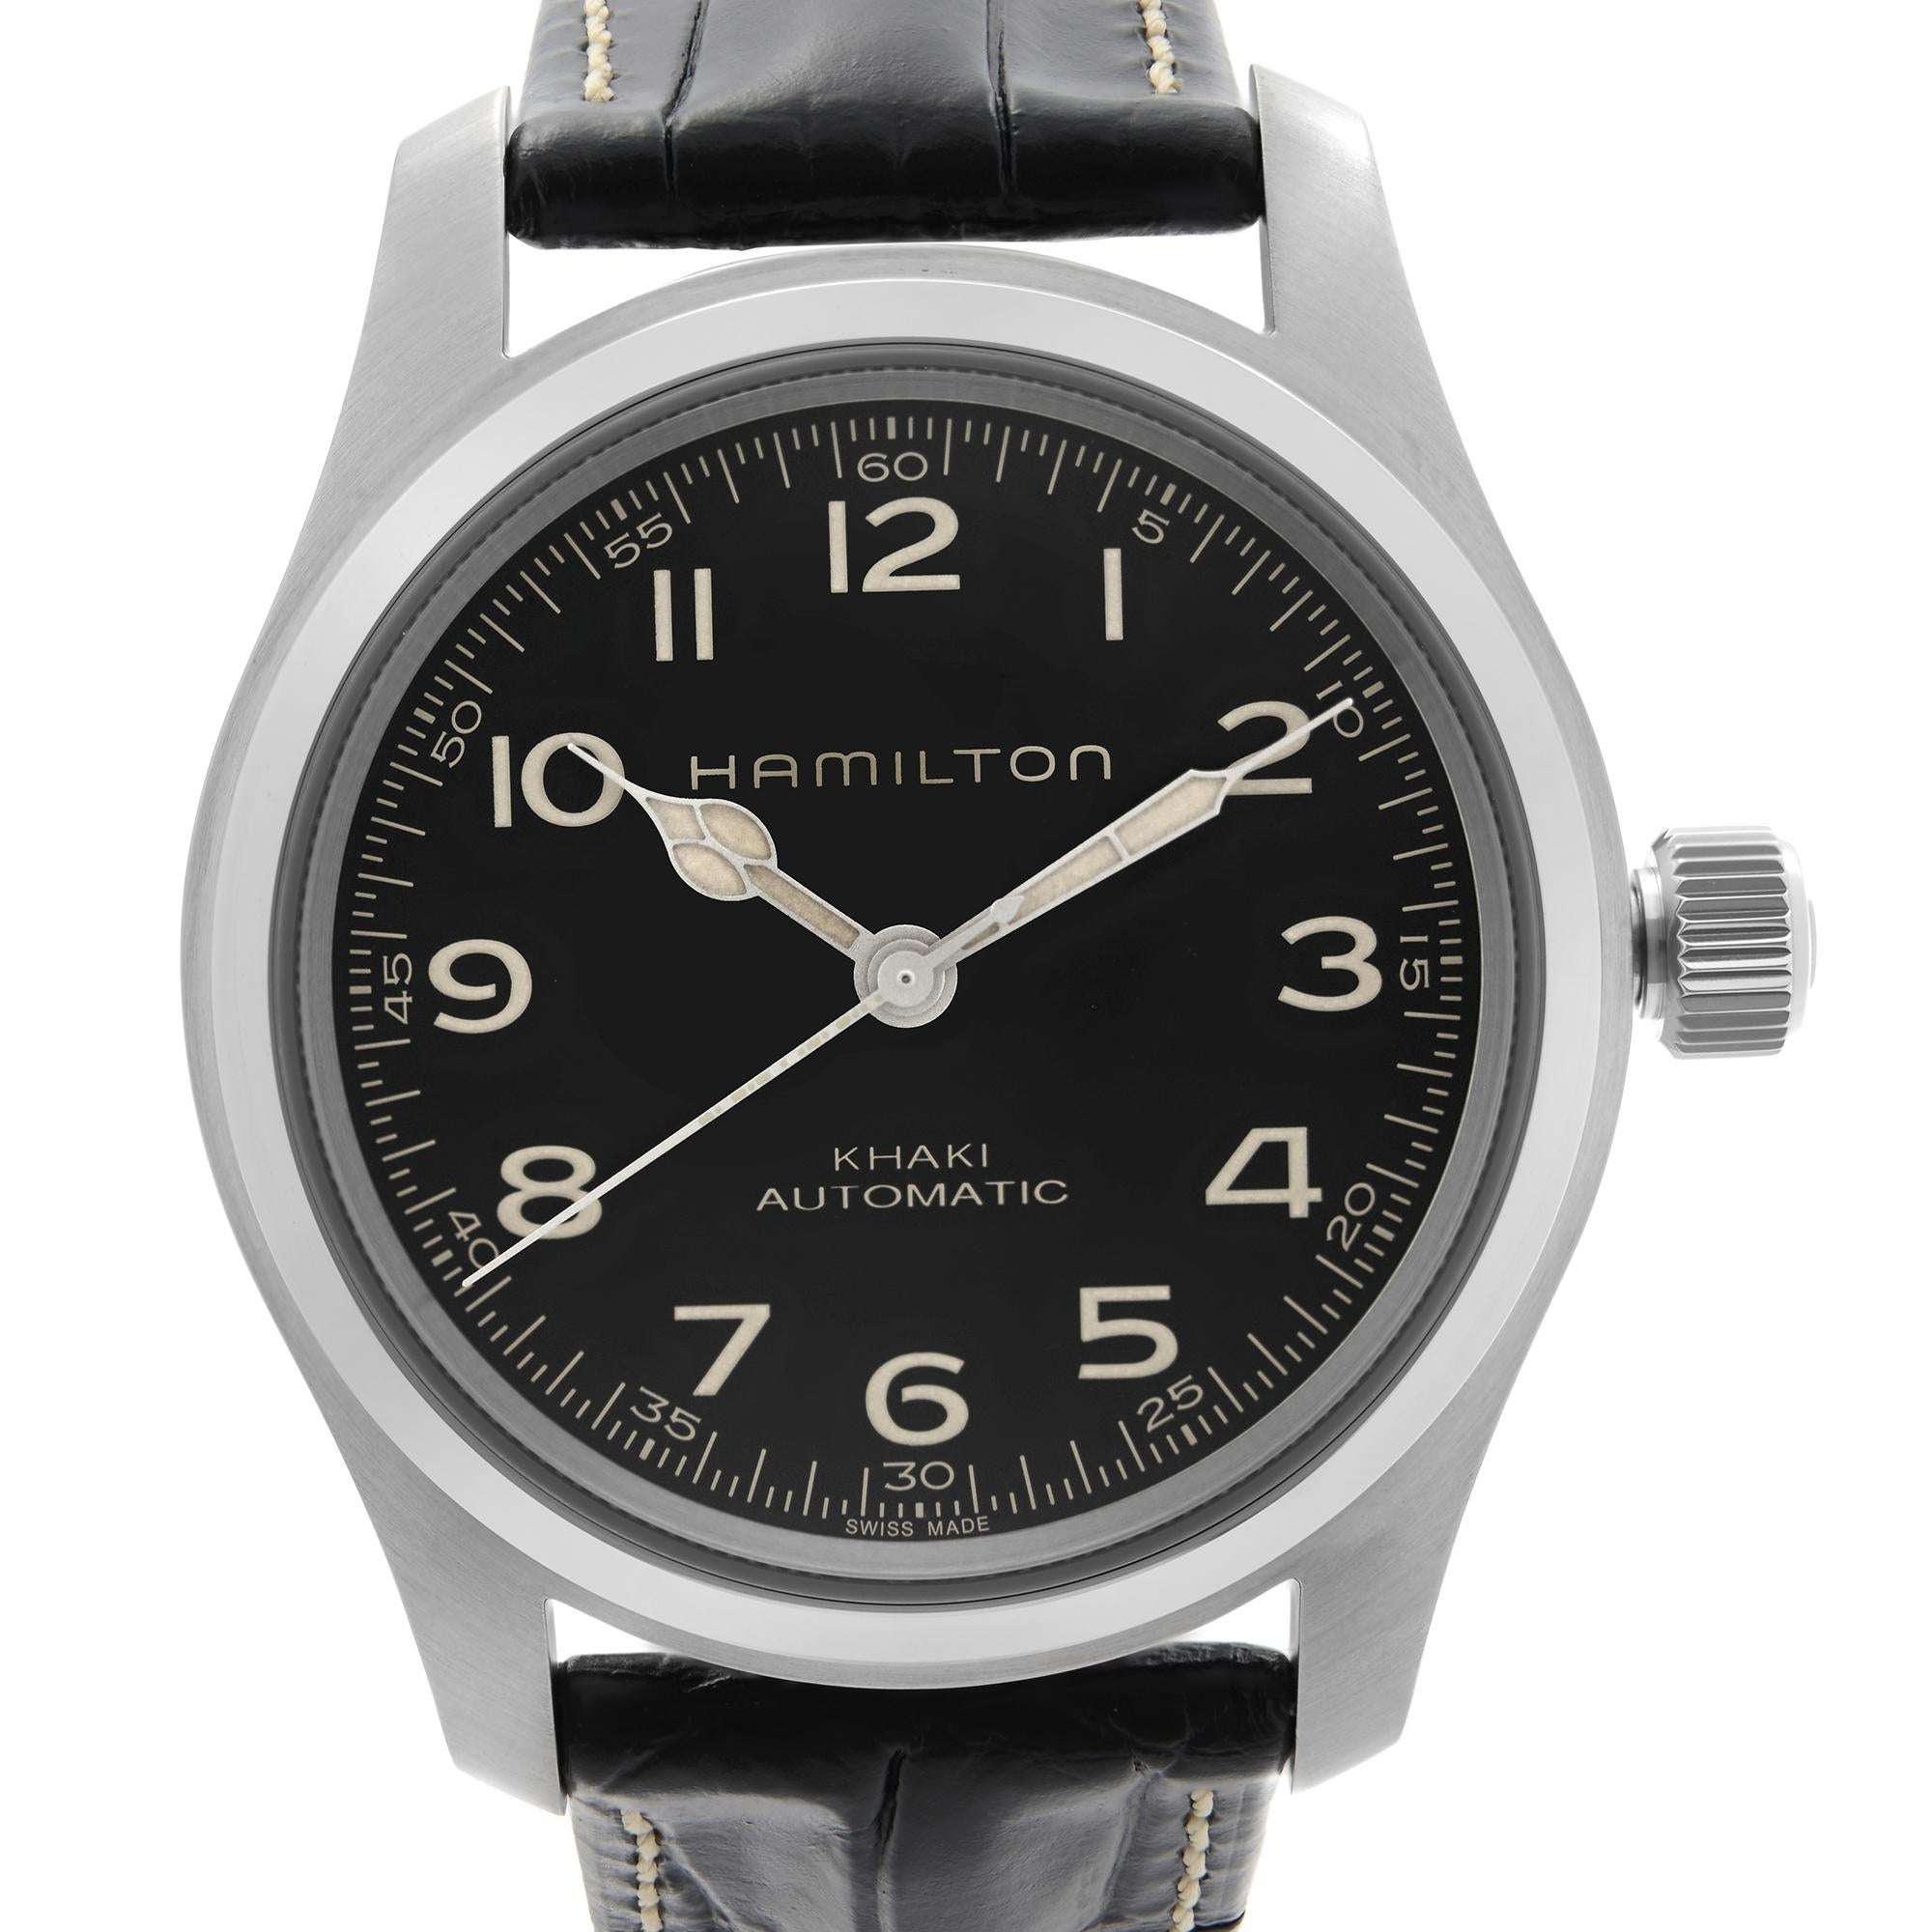 Unworn Hamilton Khaki Field Men's Watch H70605731. This Beautiful Timepiece Features: Stainless Steel Case and Two-Piece Leather Strap. Fixed Stainless Steel Bezel. Black Dial with Luminous Silver-tone Cathedral-style Hands And Arabic Numeral Hour